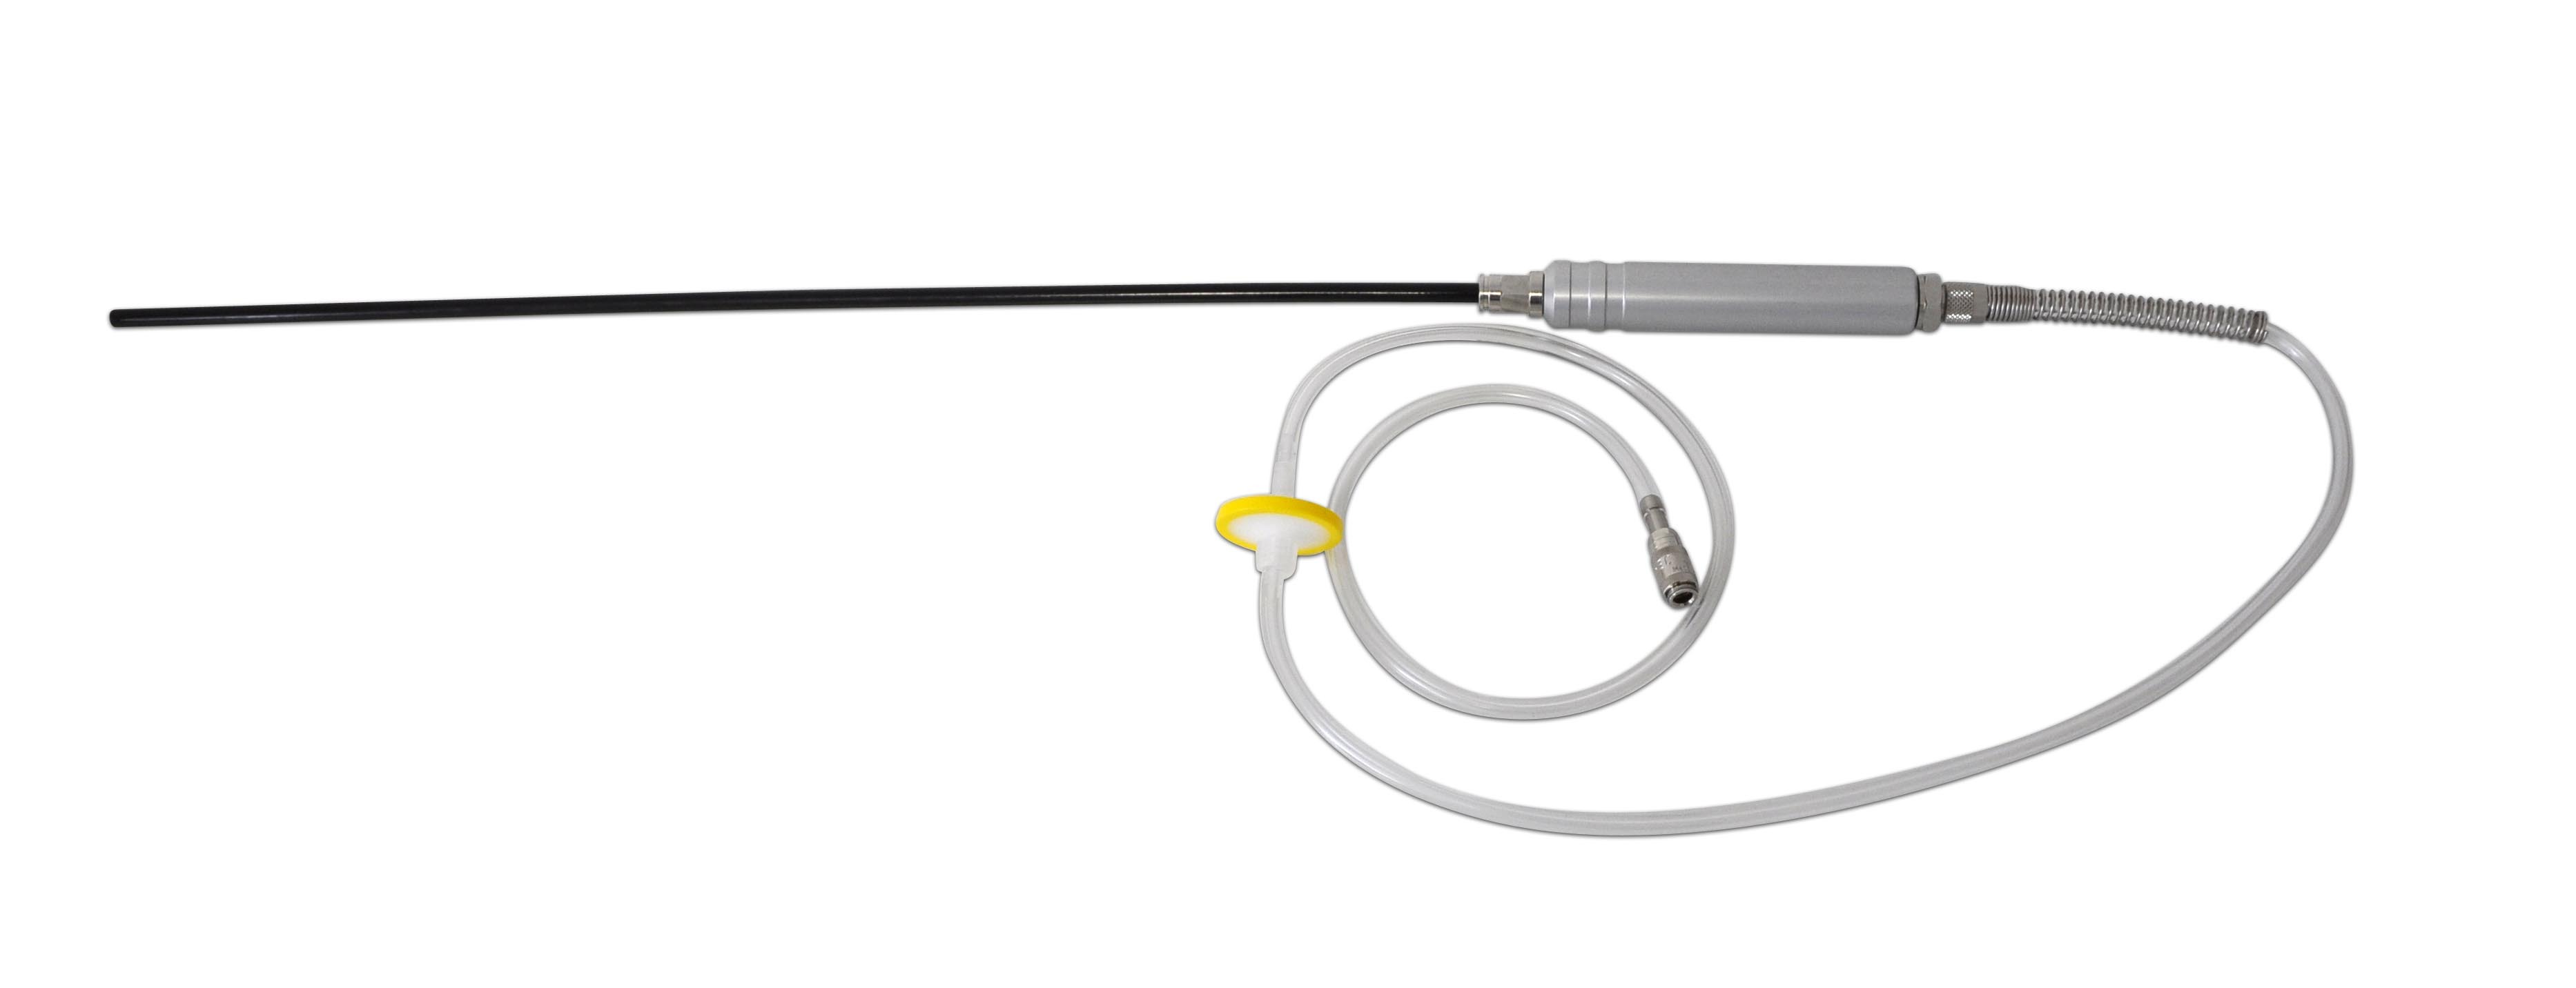 Biogas probe with handle, hose